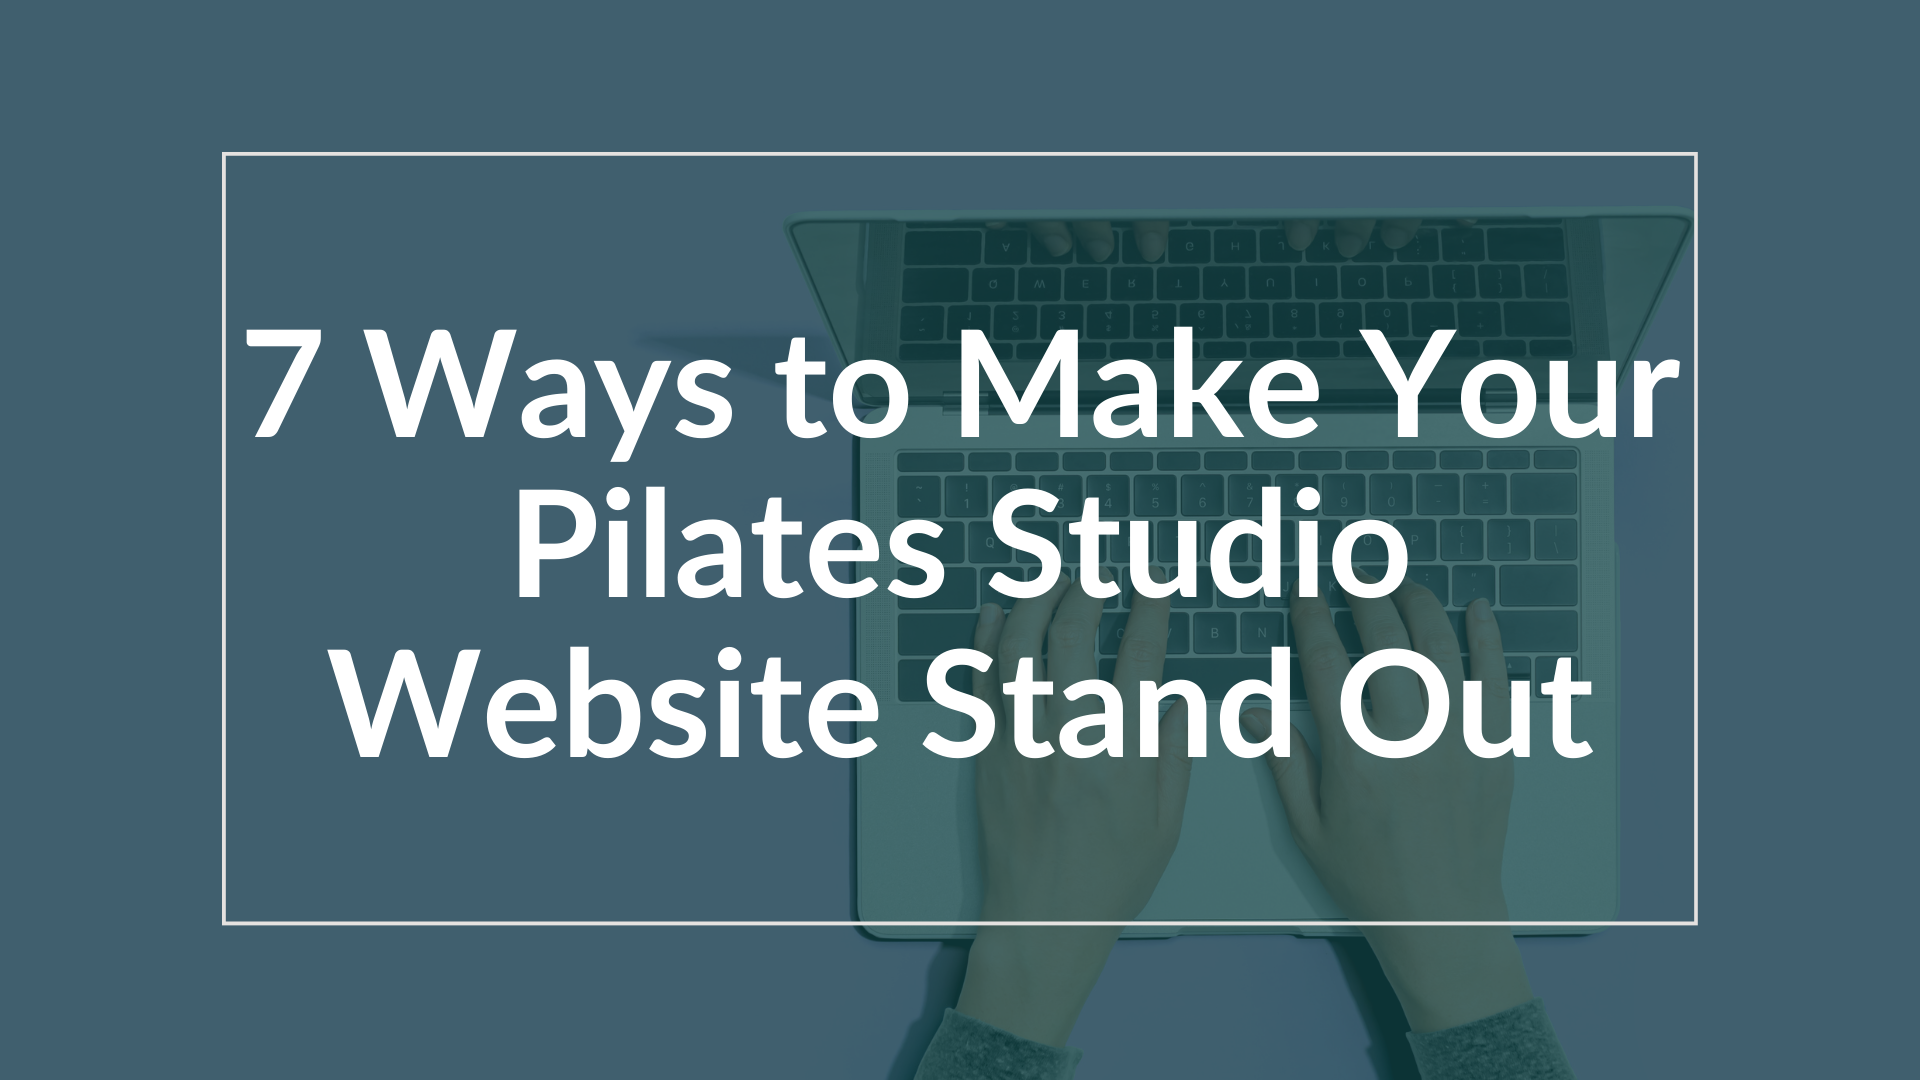 Make your Pilates studio stand out